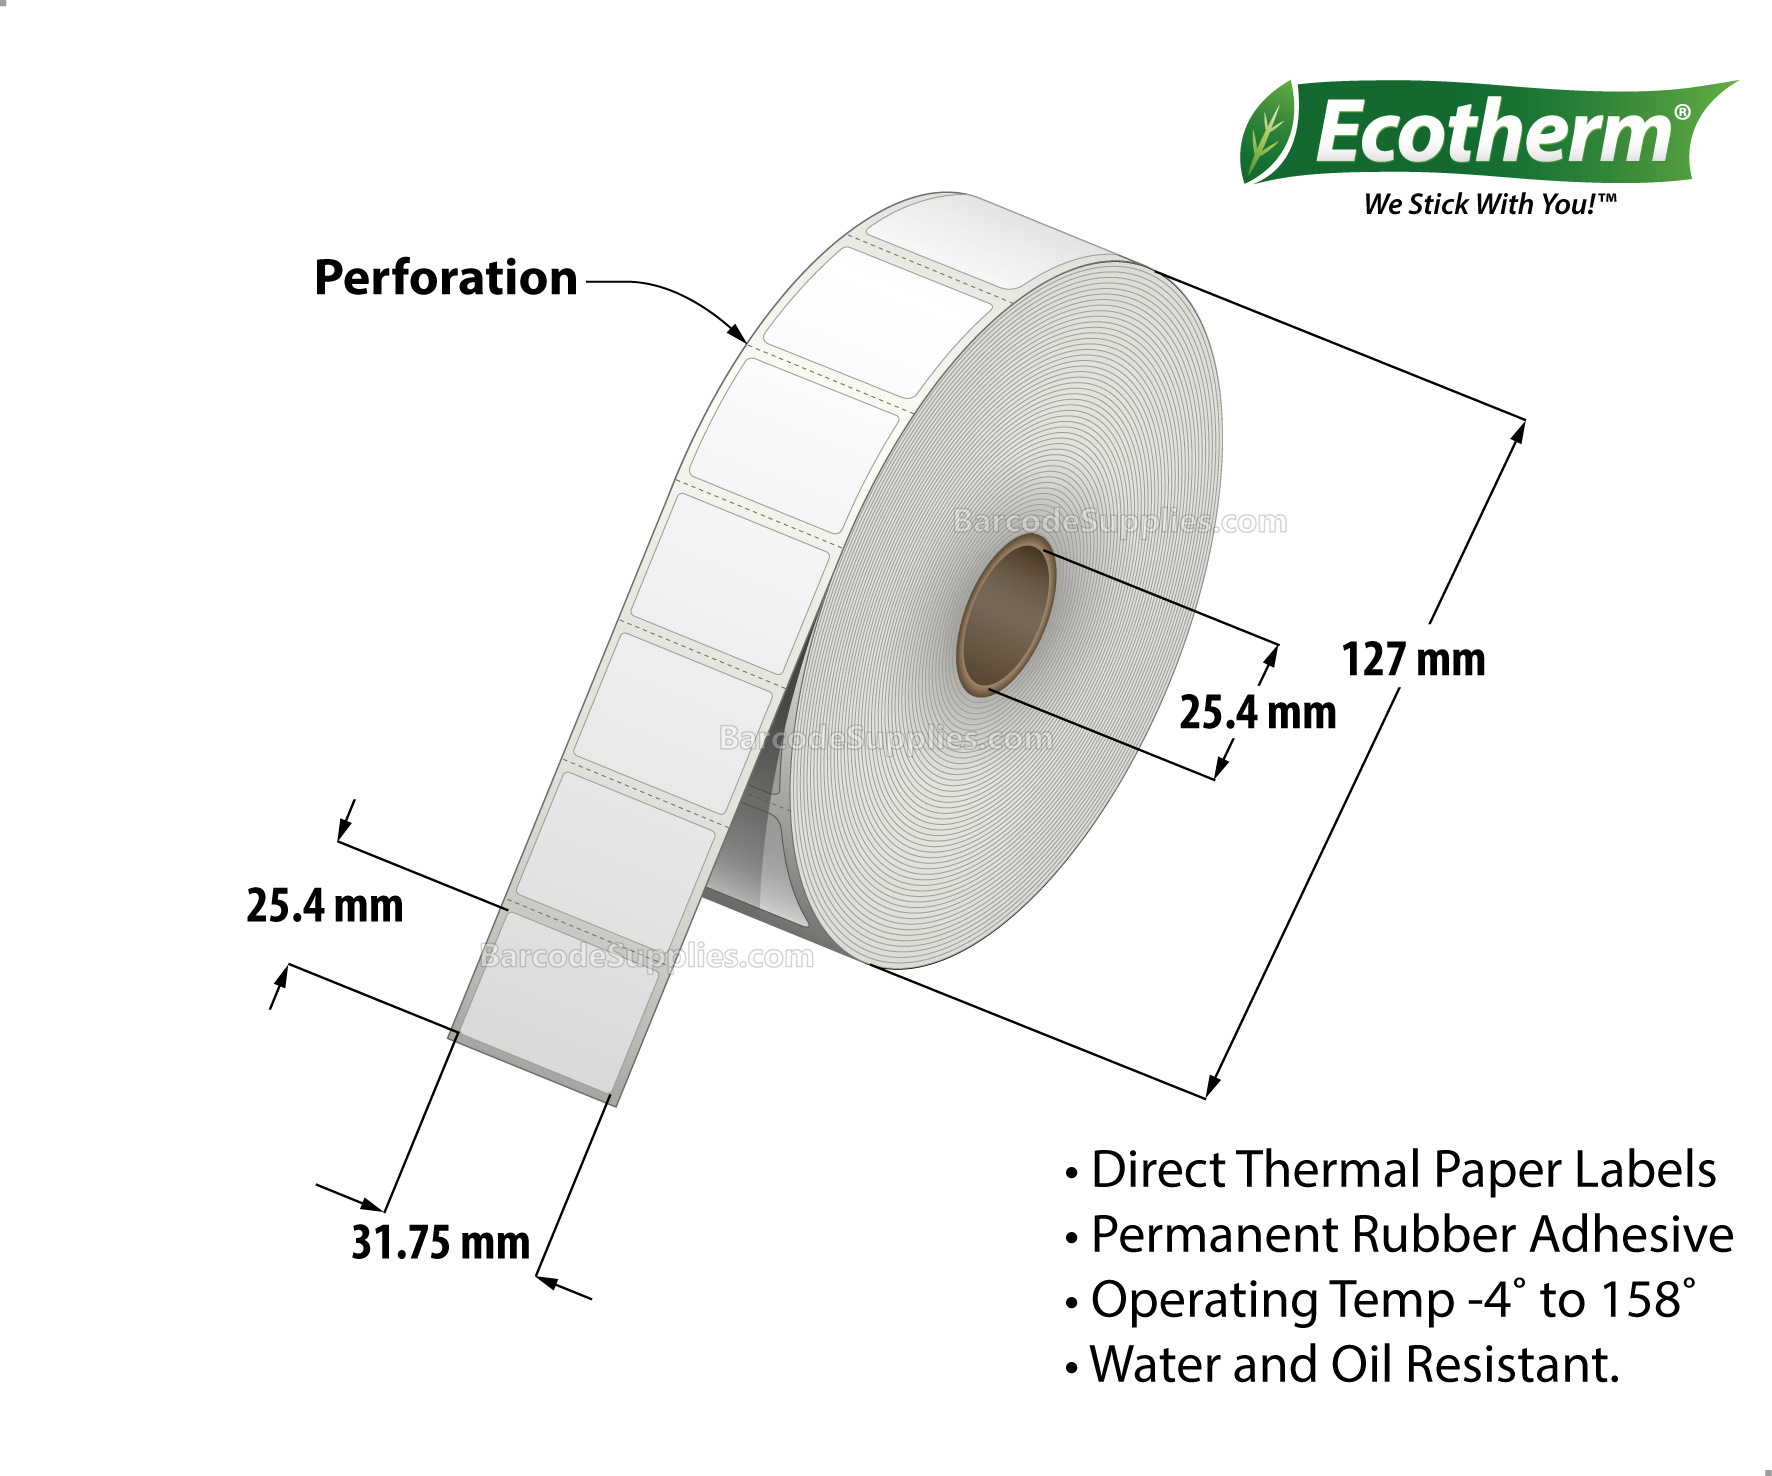 1.25 x 1 Direct Thermal White Labels With Rubber Adhesive - Perforated - 2340 Labels Per Roll - Carton Of 6 Rolls - 14040 Labels Total - MPN: ECOTHERM15114-6